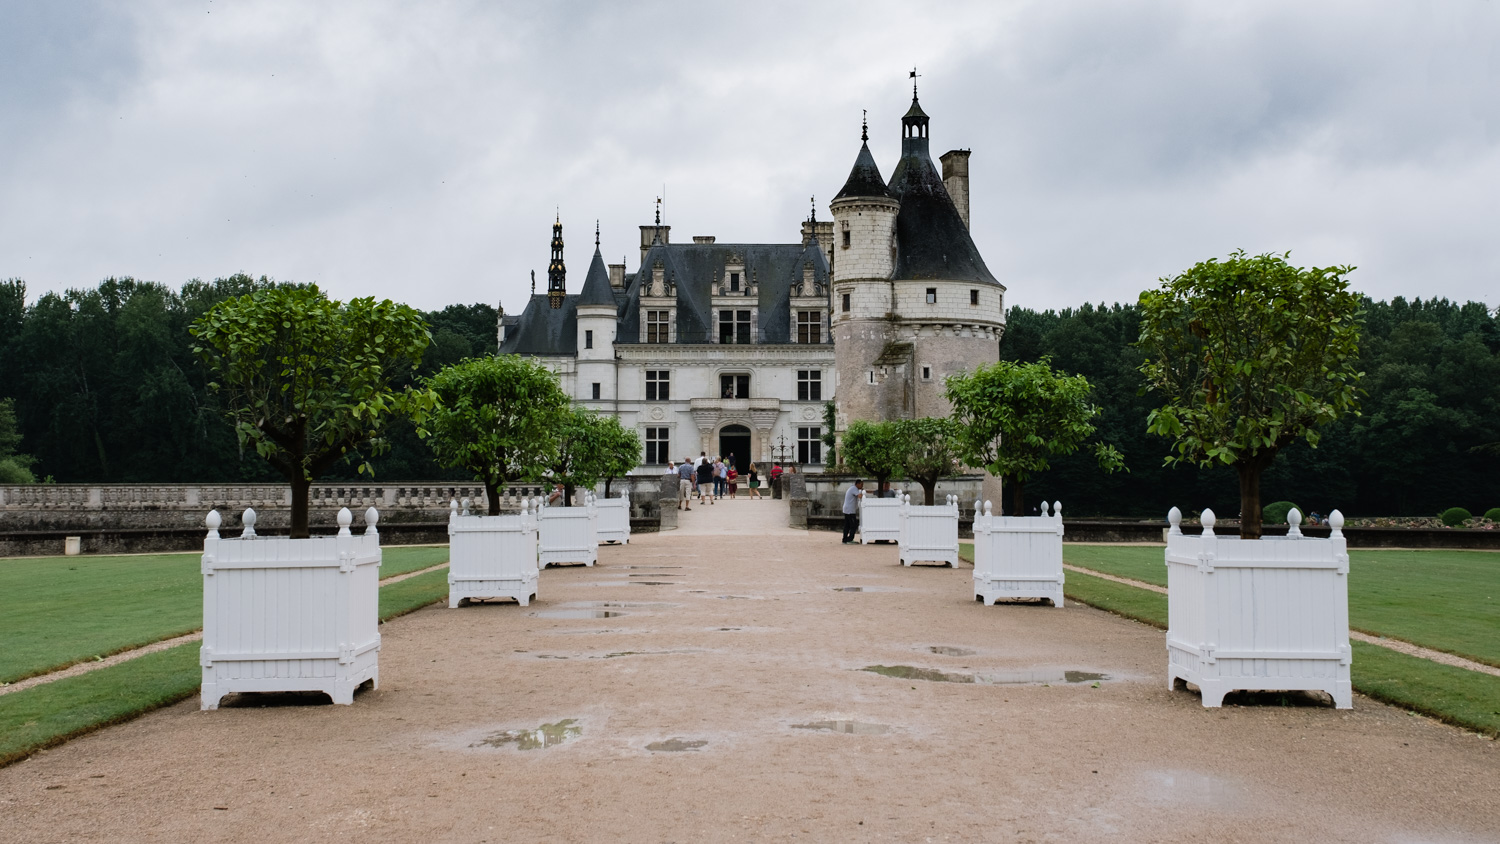 Front view of Château de Chenonceau - Travel photography and guide by © Natasha Lequepeys for "And Then I Met Yoko". #loirevalley #france #travelguide #travelphotography #valdeloire